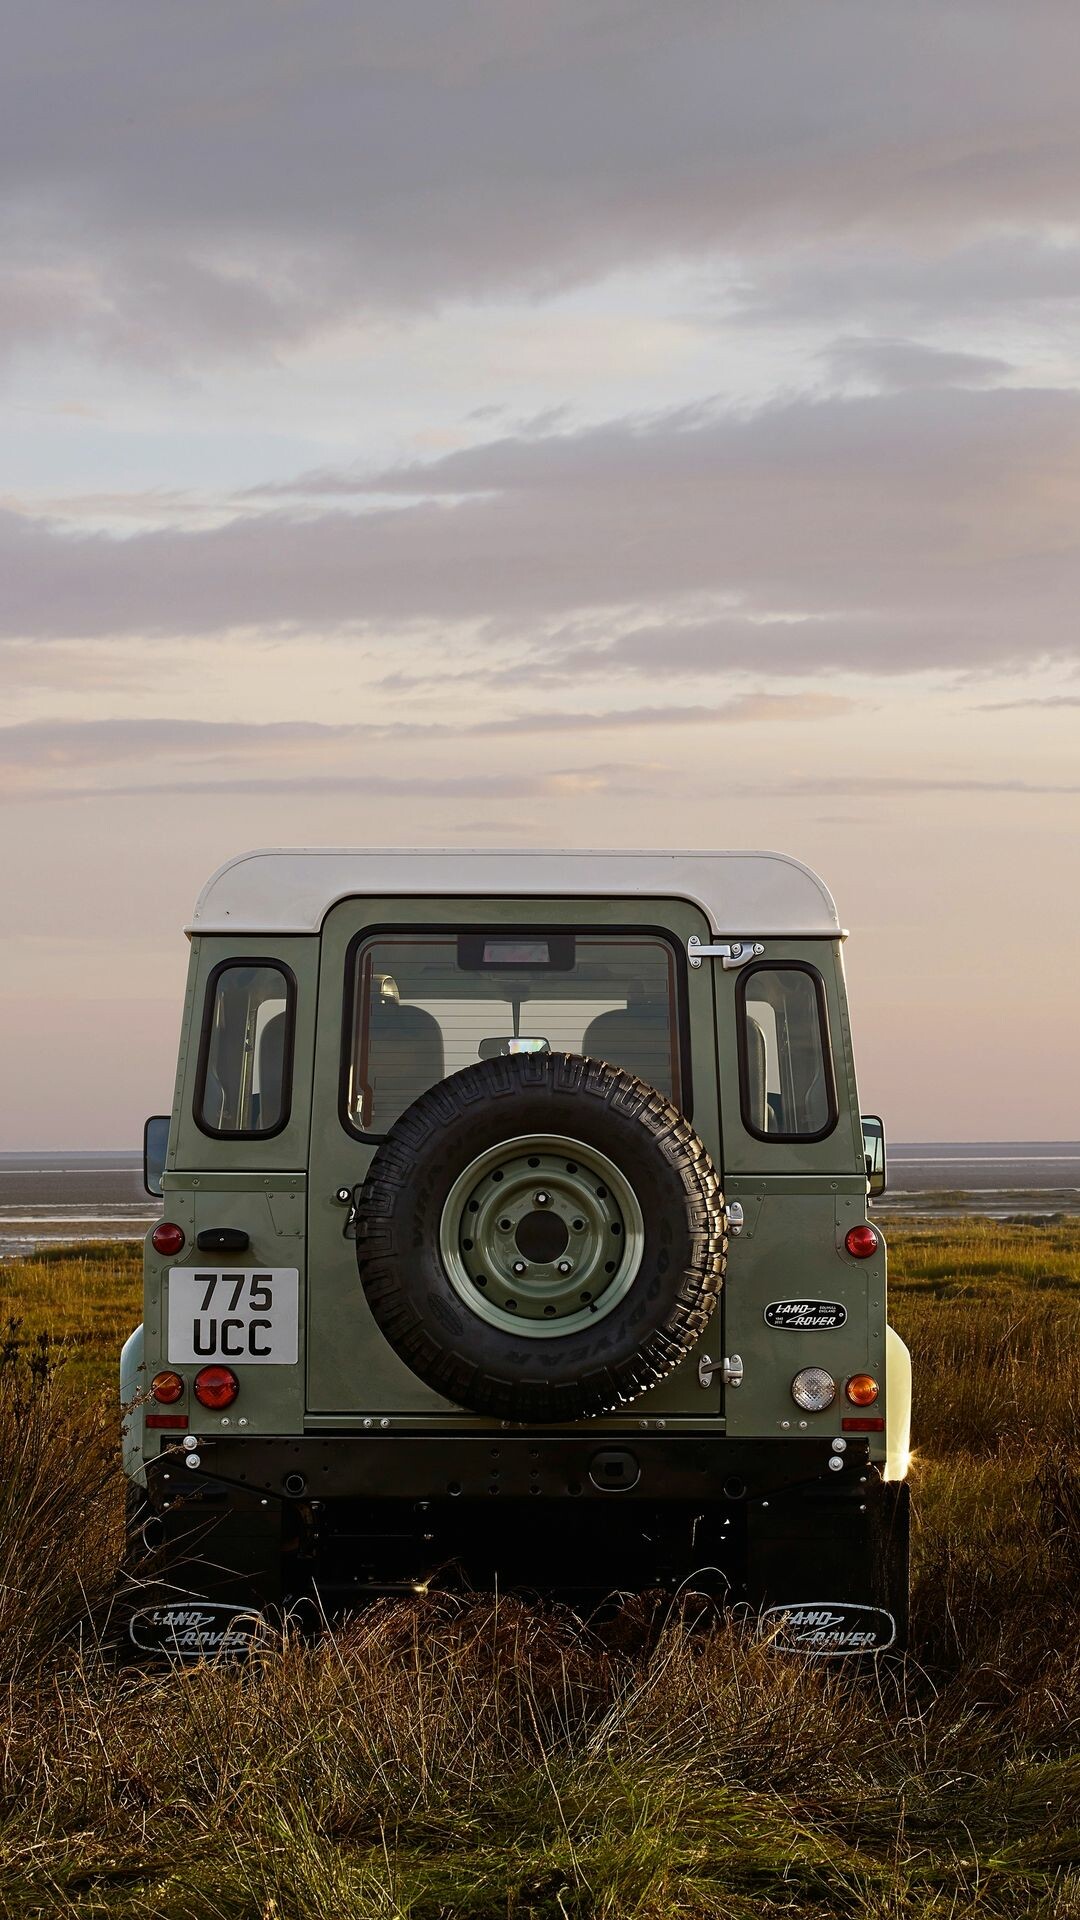 Land Rover: Defender, A British brand of predominantly four-wheel drive, off-road capable vehicles. 1080x1920 Full HD Background.